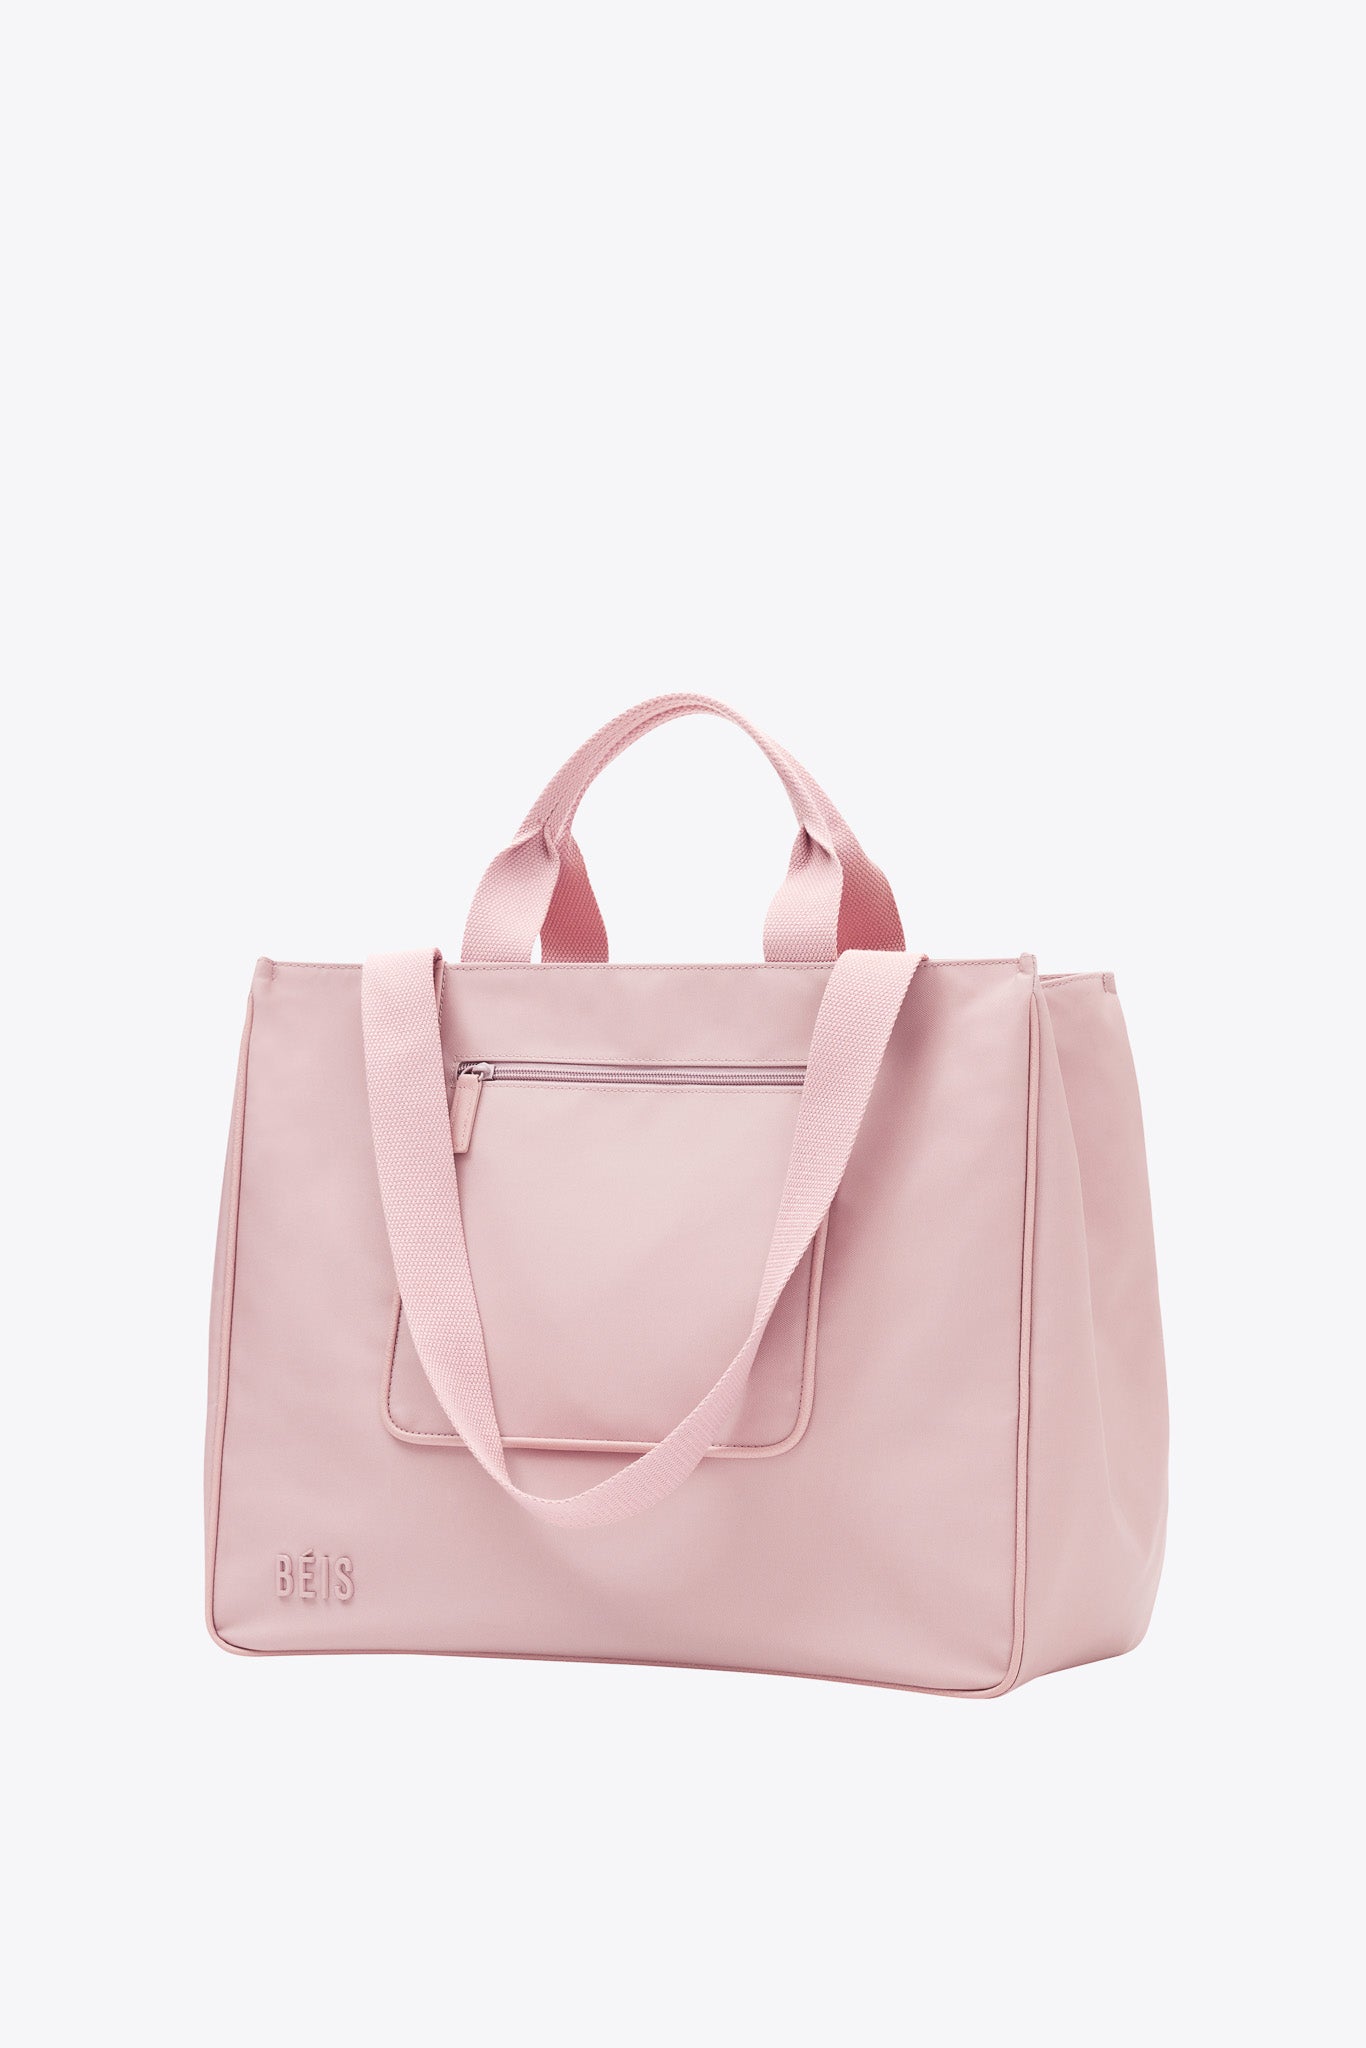 The East To West Tote in Atlas Pink